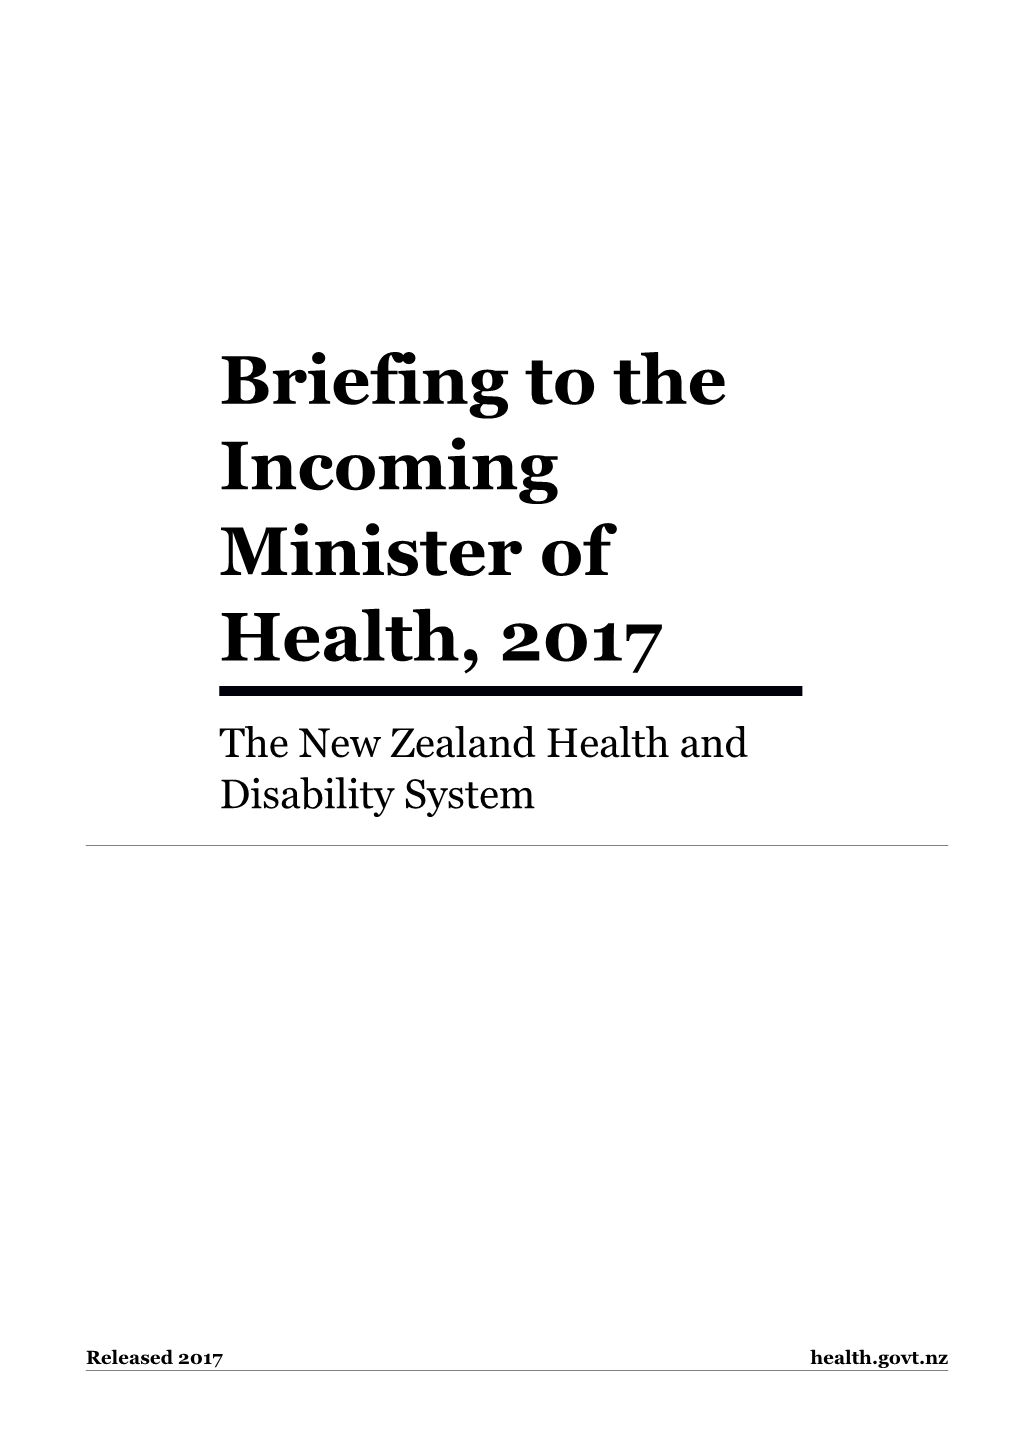 Briefing to the Incoming Minister of Health 2017